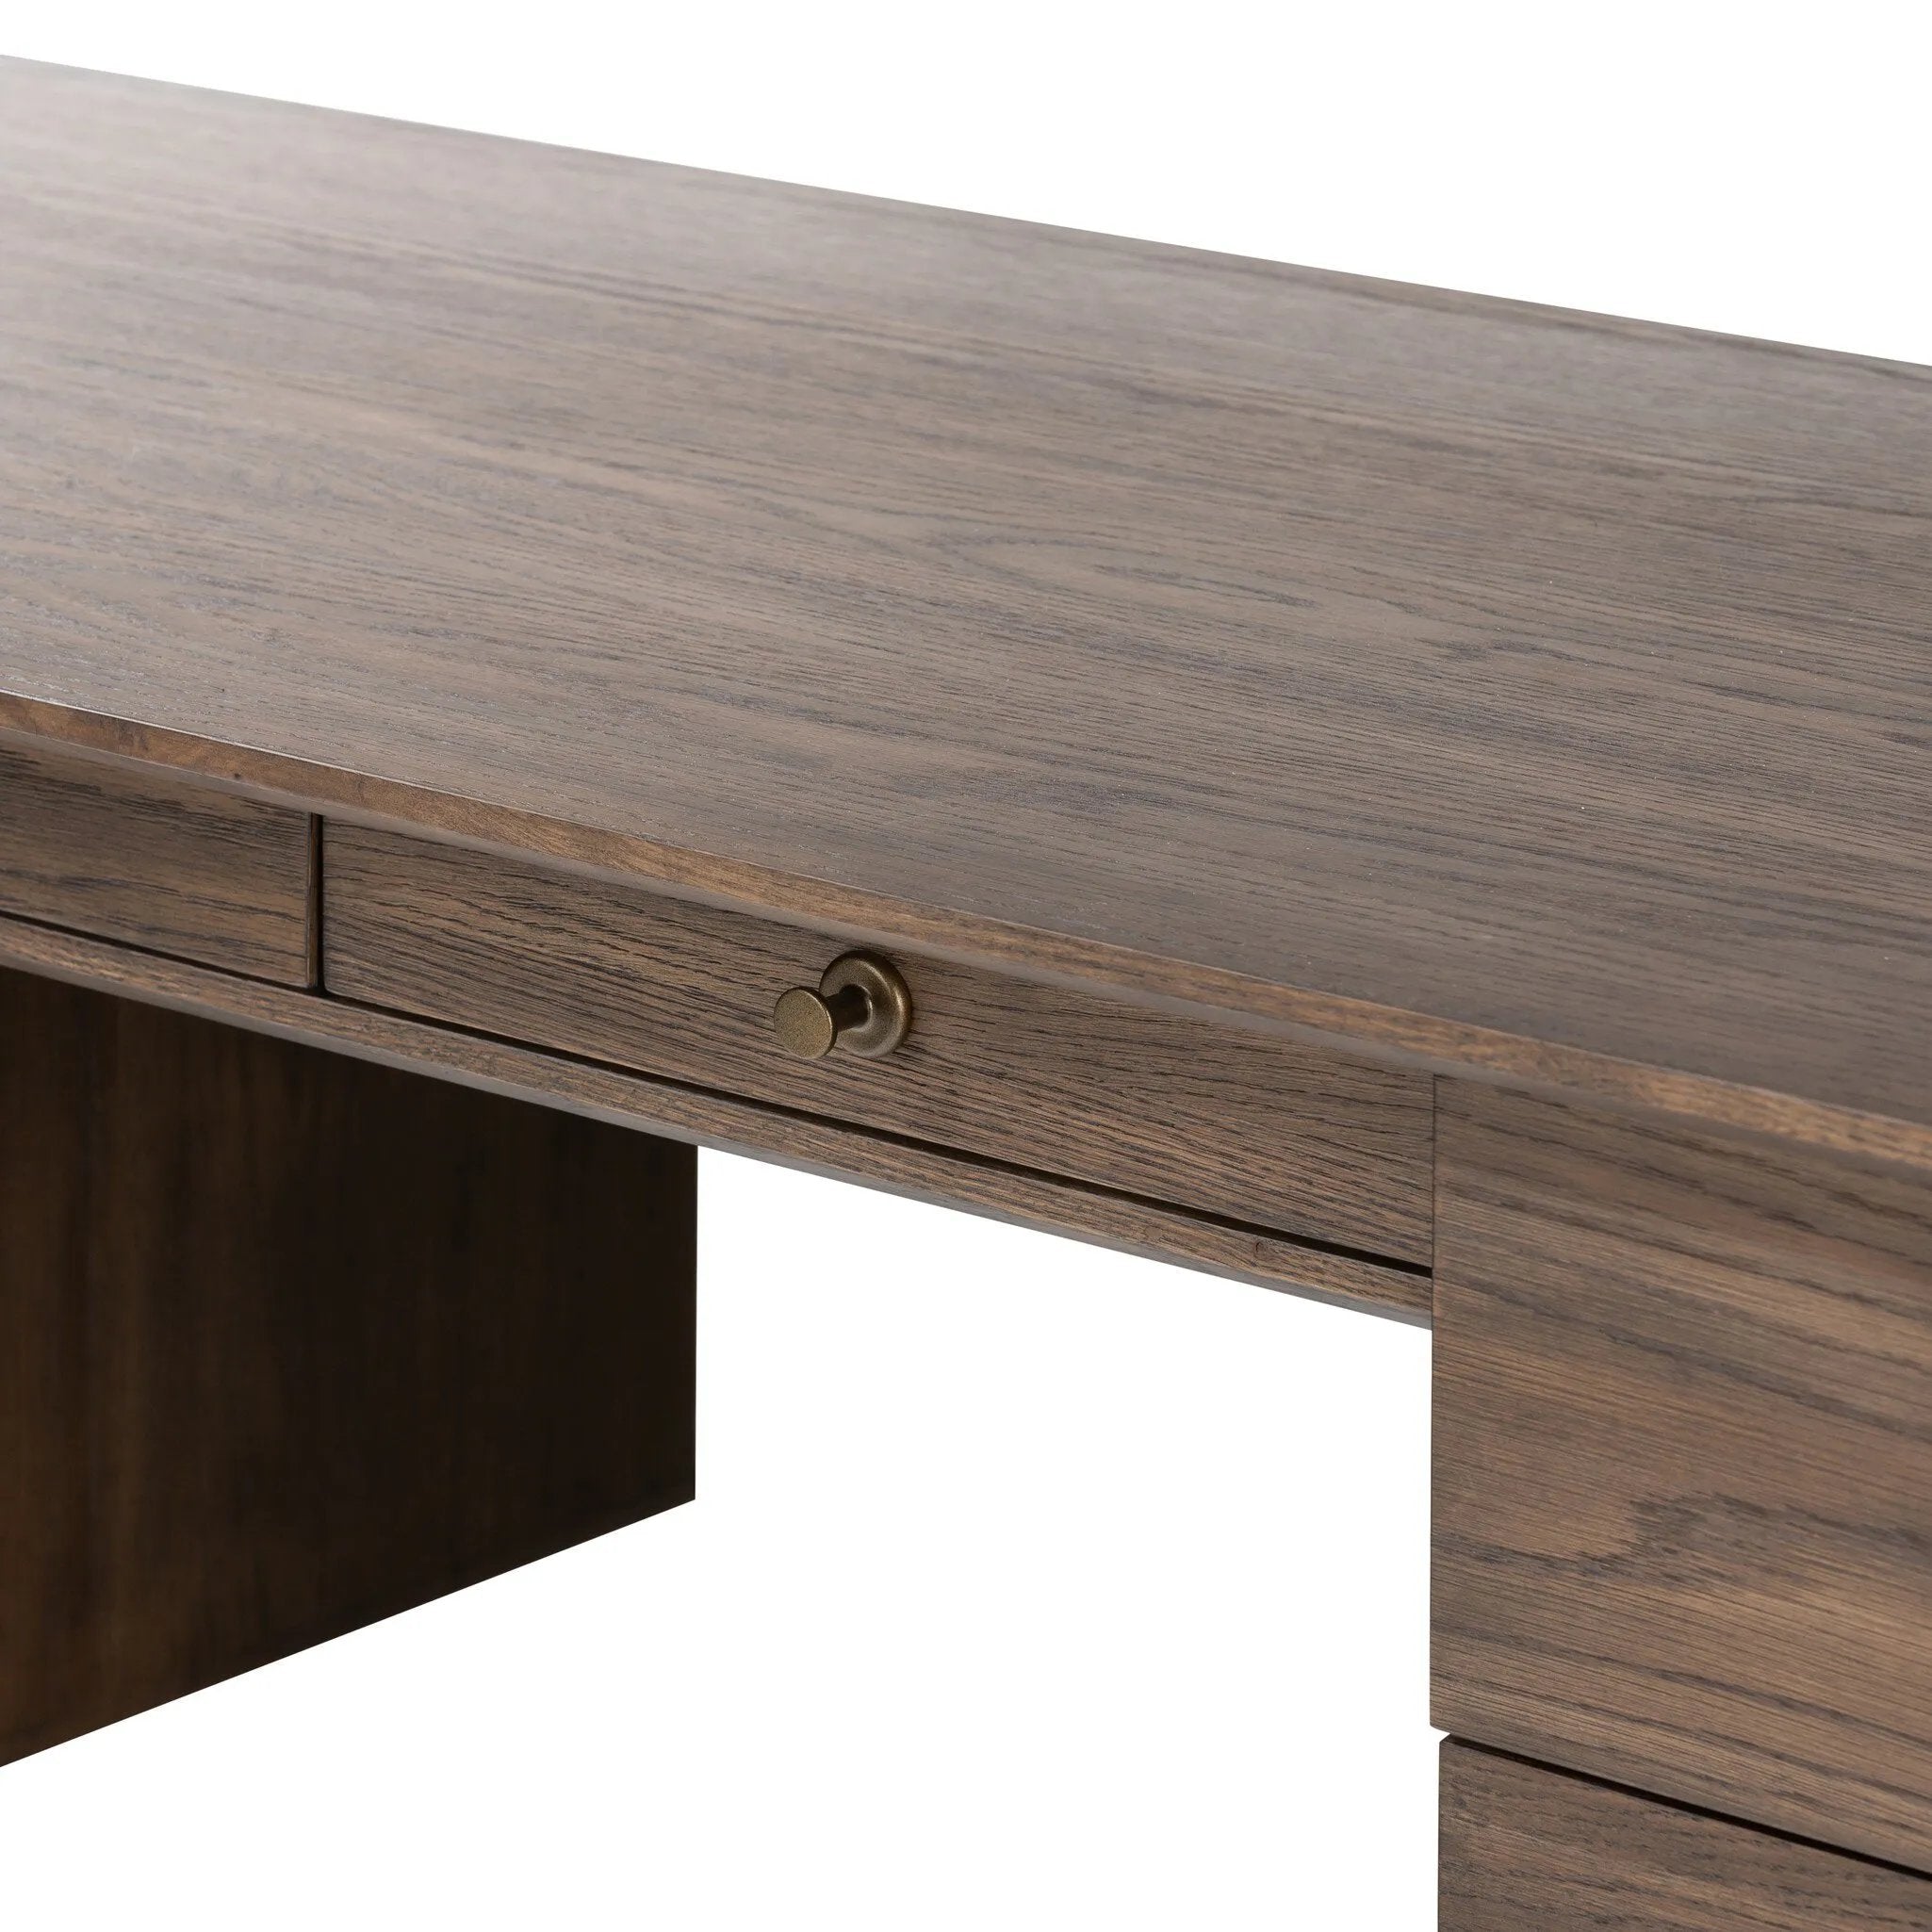 An executive-style desk of aged oak, inspired by European antiques. Turned, cylindrical legs adapt this charming heirloom-inspired piece for the modern home office and beyond.Collection: Haide Amethyst Home provides interior design, new home construction design consulting, vintage area rugs, and lighting in the Laguna Beach metro area.